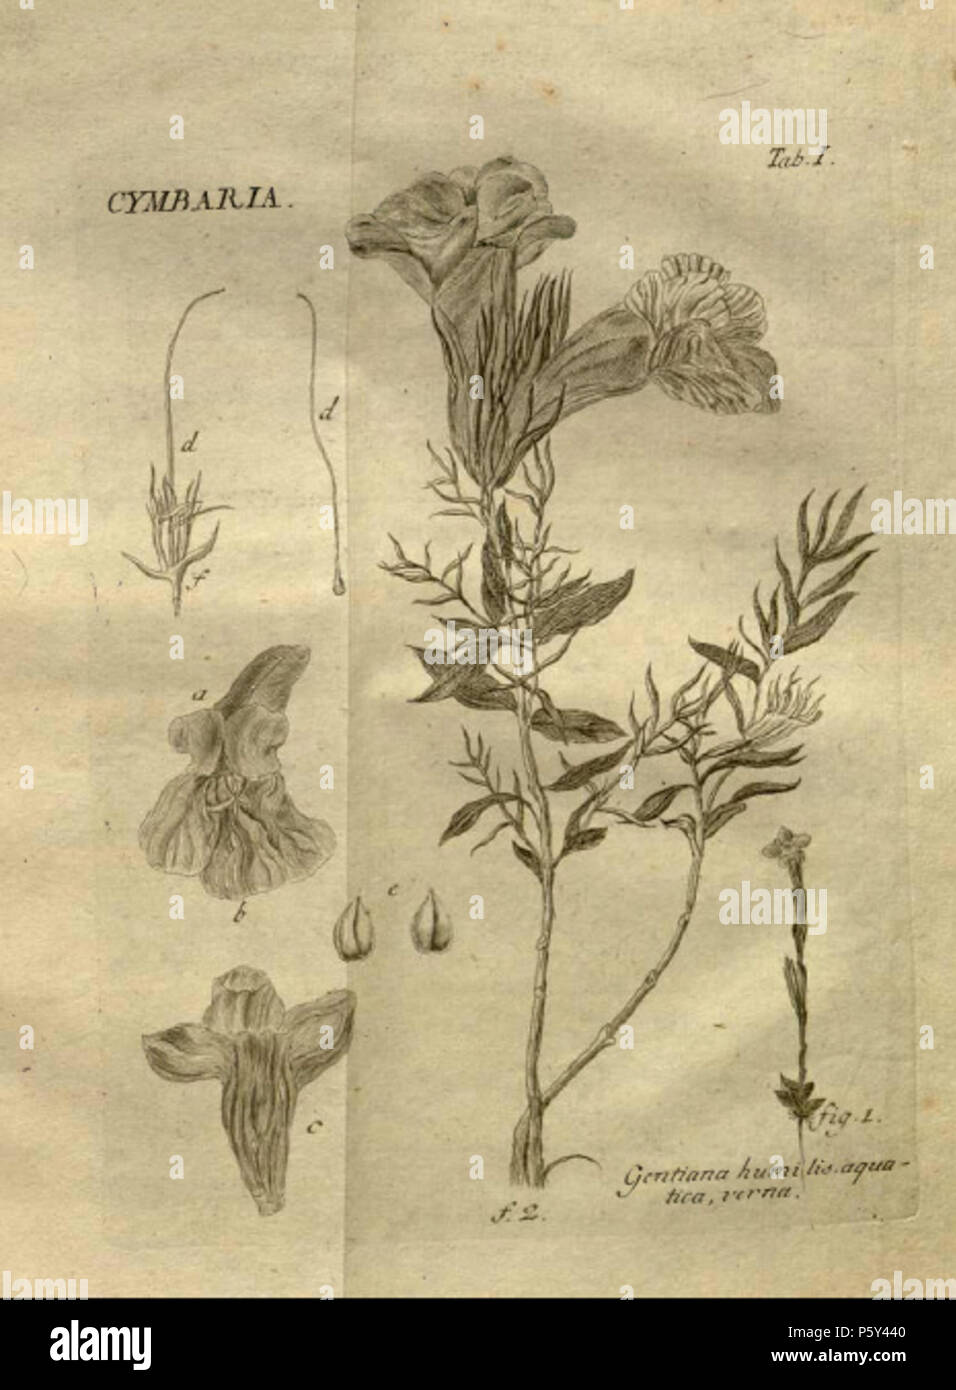 N/A. Formerly Cymbaria L. (now Cymbochasma Endl.) and Gentiana humilis, aquatica and verna. Illustration from Stirpium rariorum … ab Ioanne Ammano . 1739. Johann Amman (1707-1741) 396 Cymbaria and Gentiana humilis aquatica verna Stock Photo